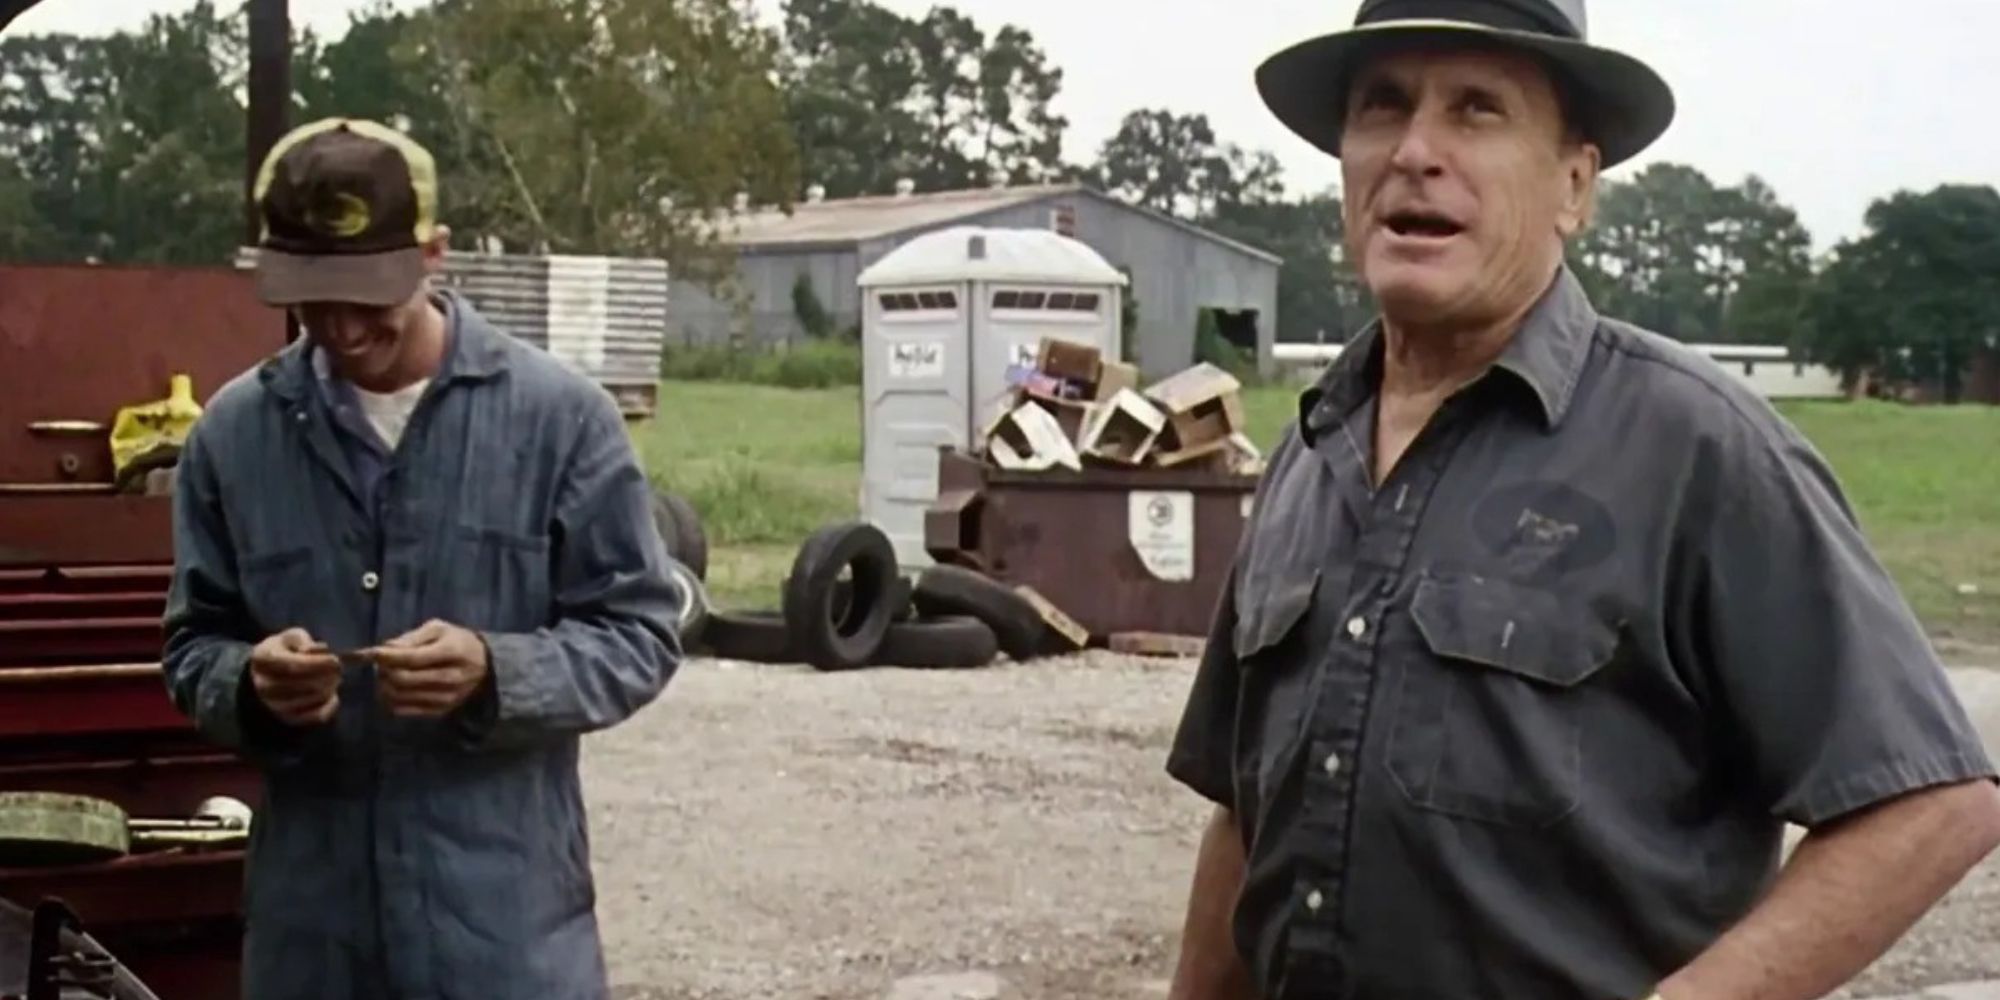 Robert Duvall as Euliss F. "Sonny" Dewey, standing outside with another man and laughing in The Apostle